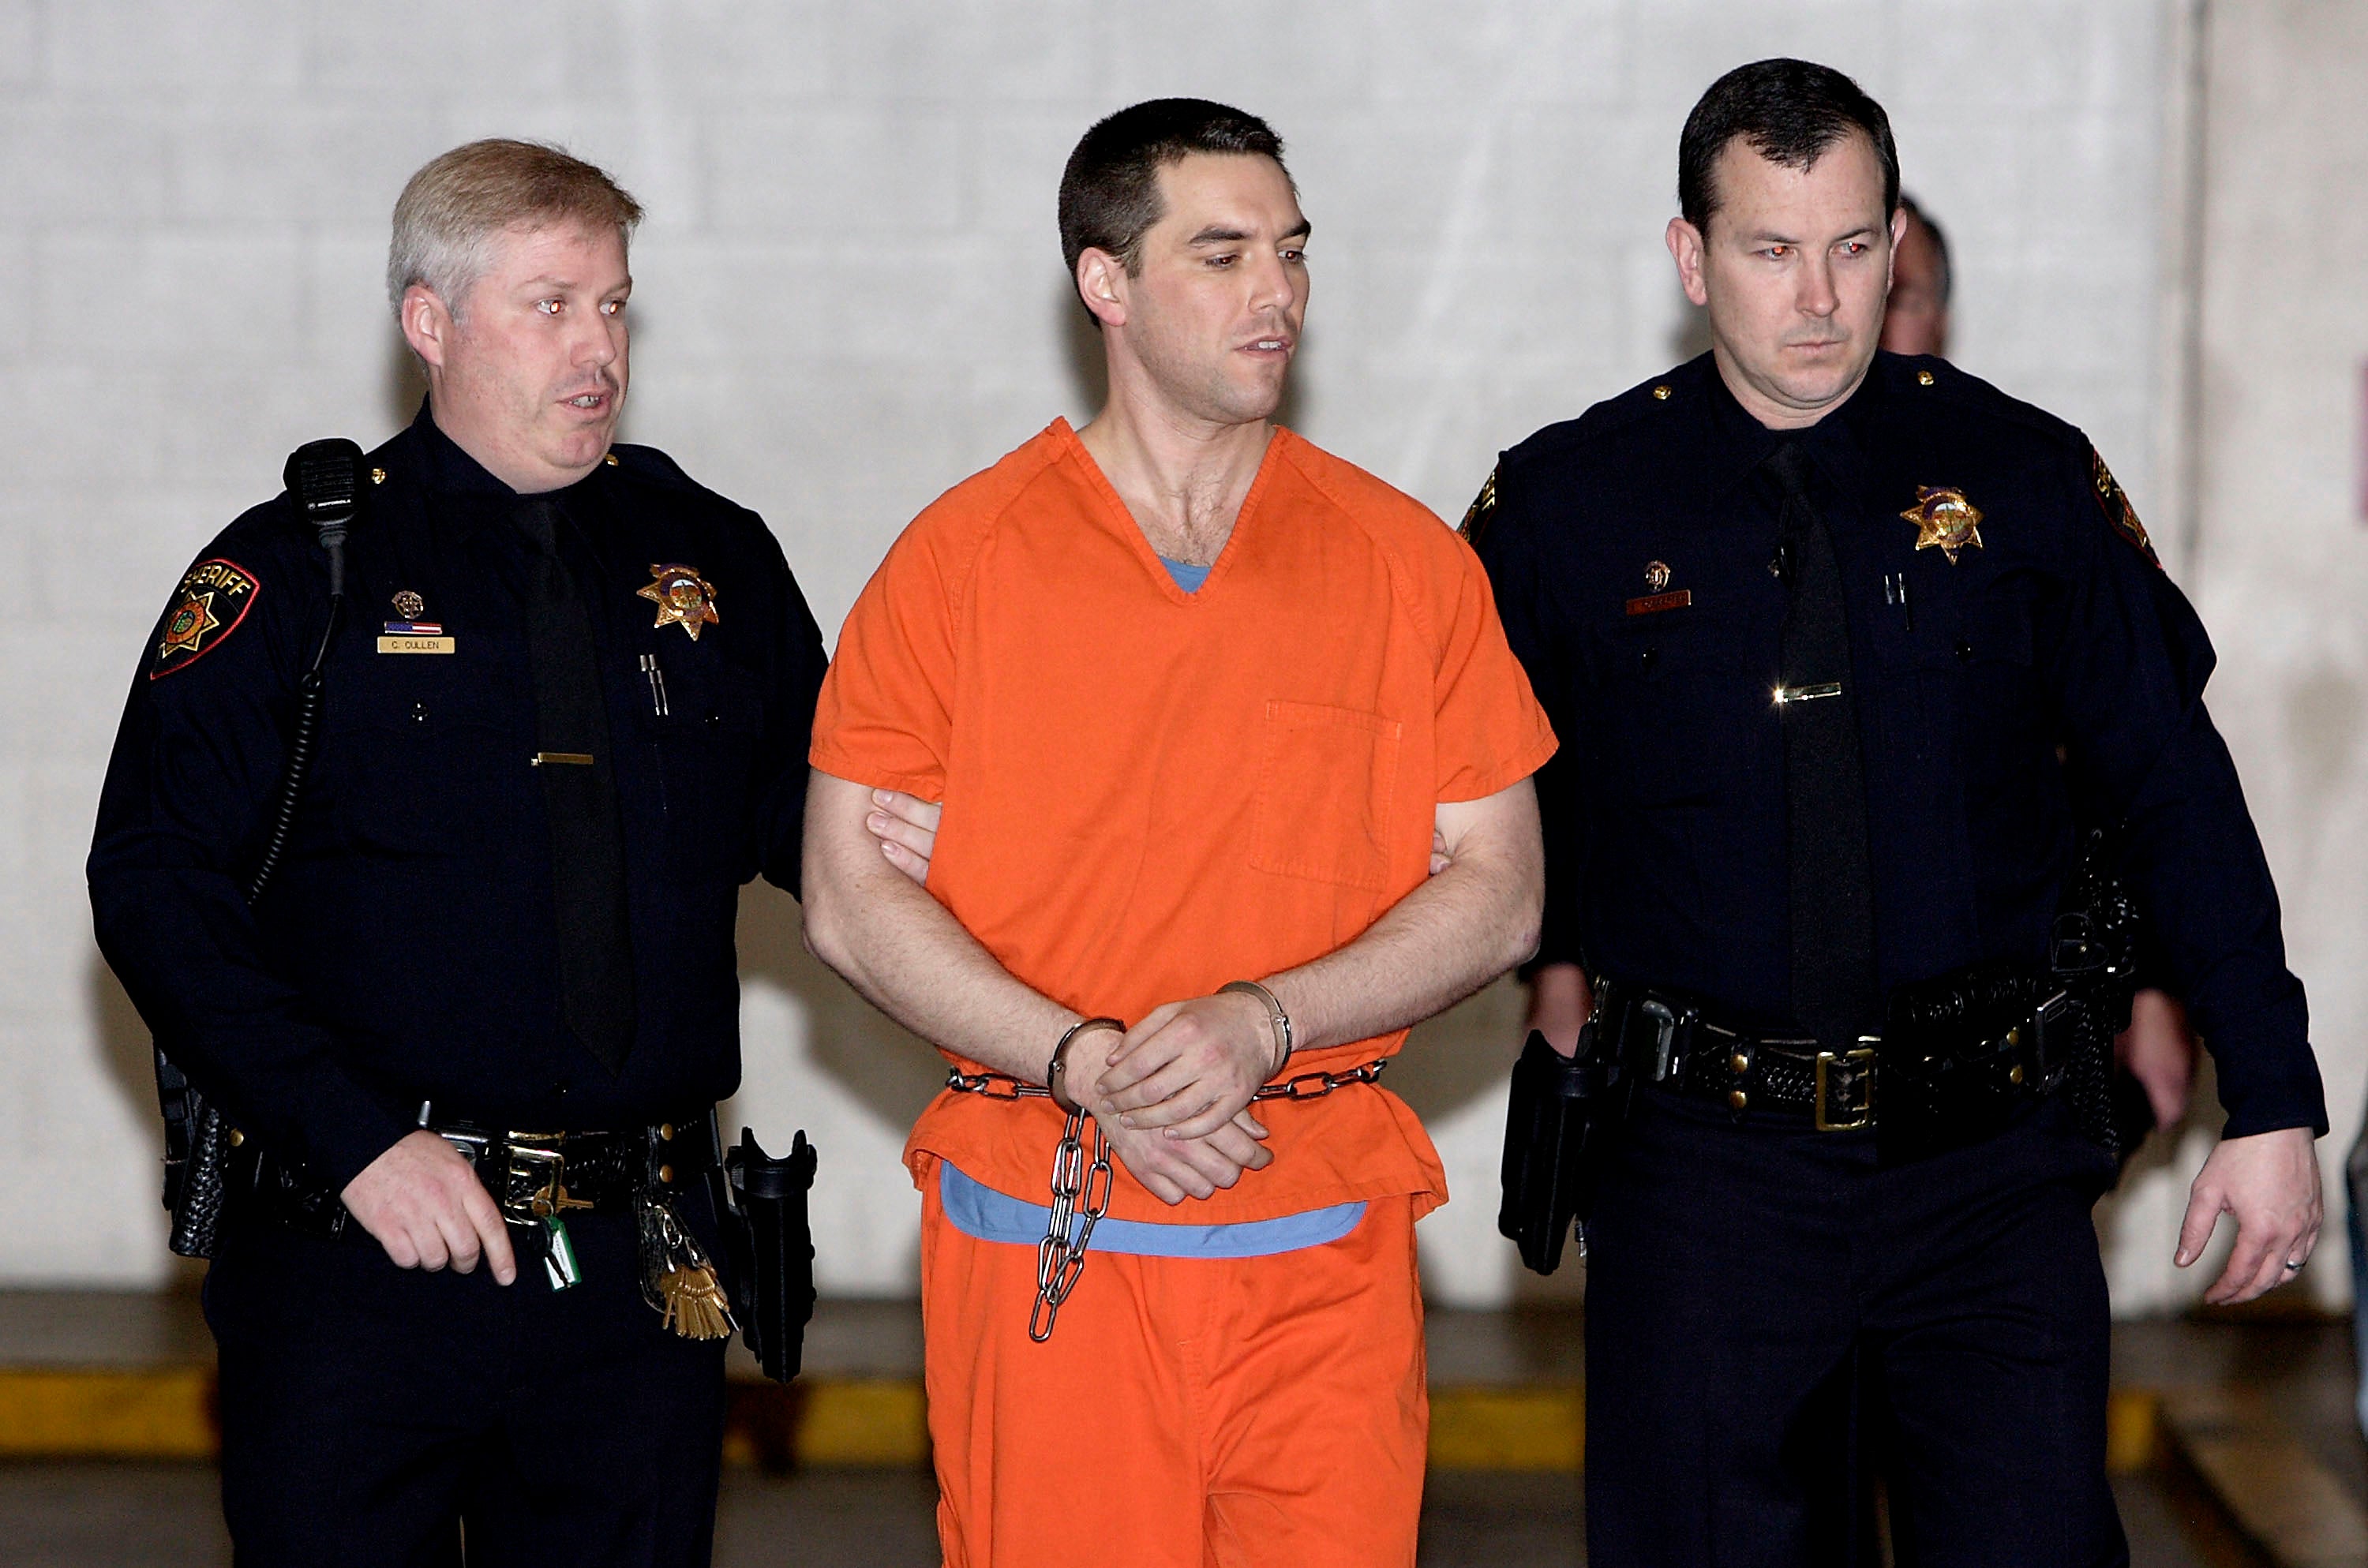 Scott Peterson seen after being sentenced to death in 2005